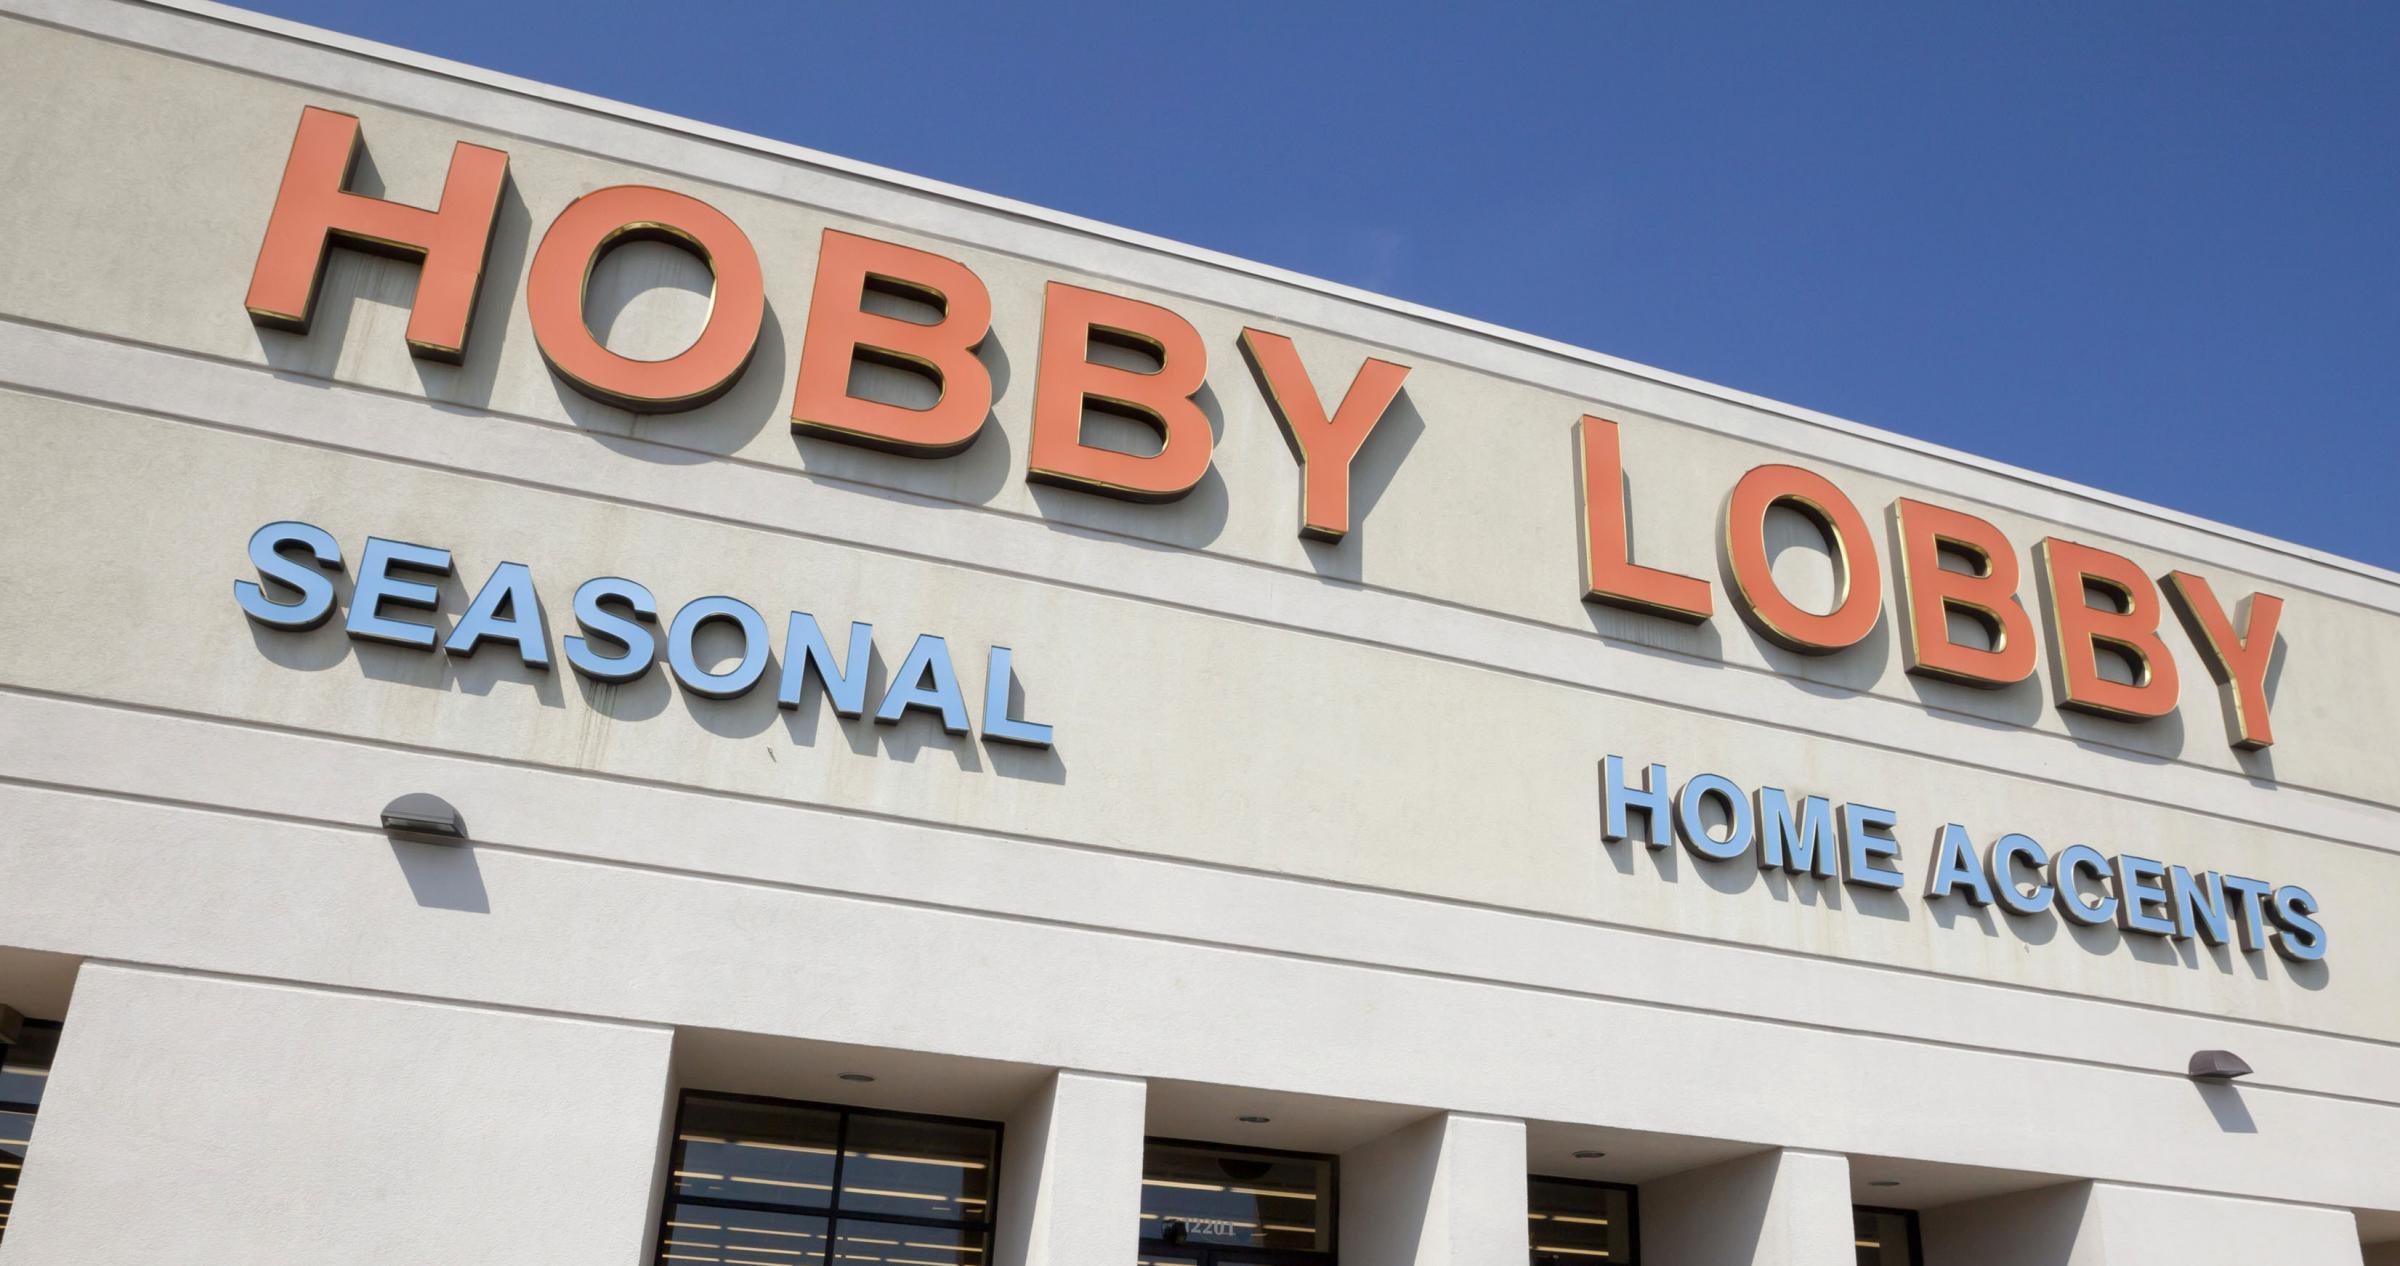 Hobby Lobby Moving Locations In Normal | WGLT